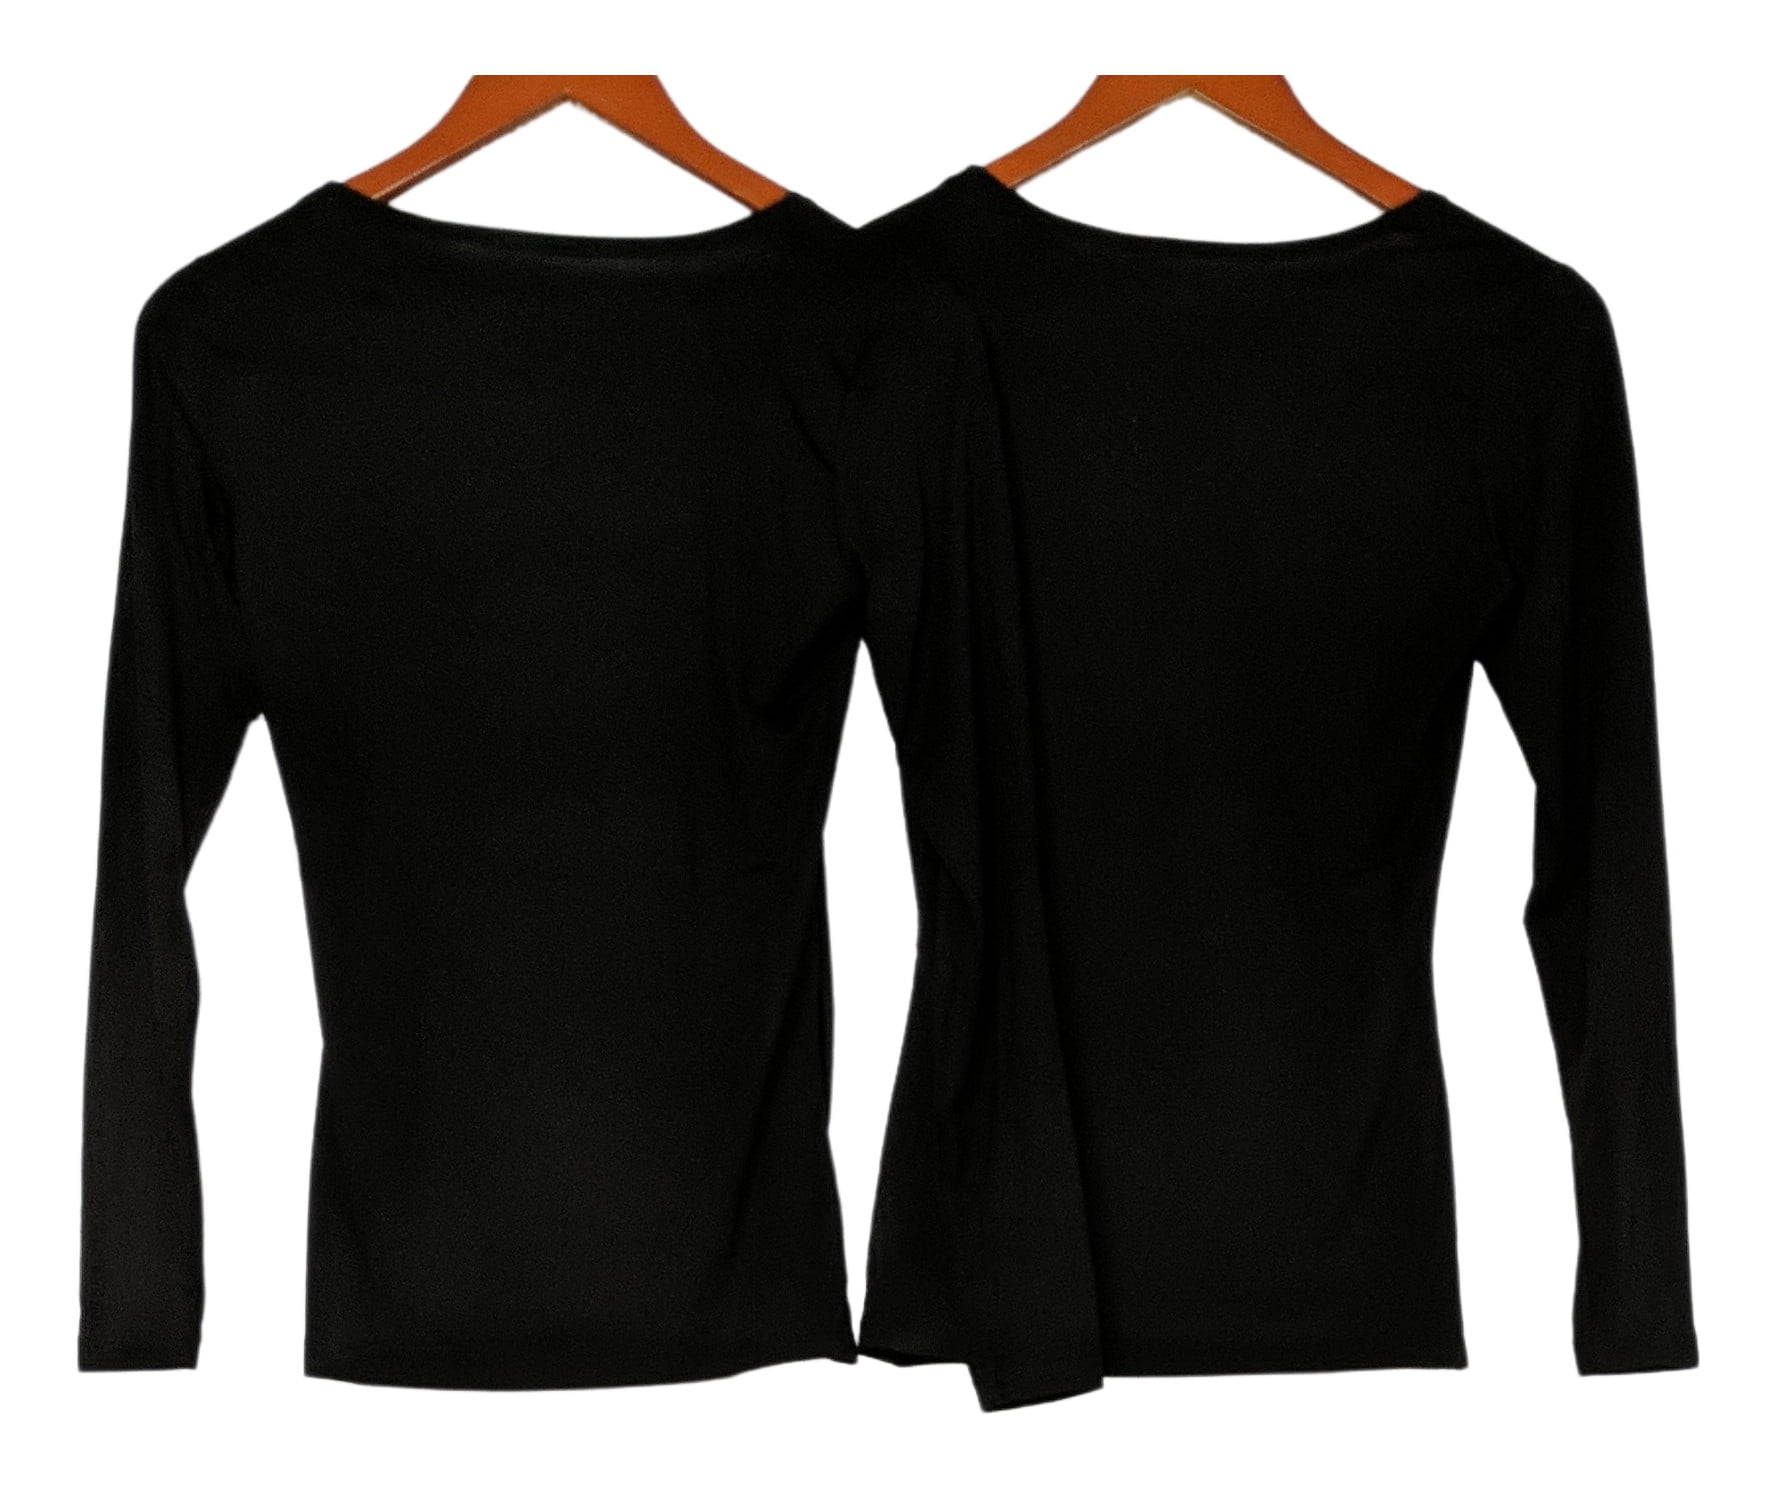 32 DEGREES Women's Scoop Neck Long Sleeve Base Layer Shirts 2 Pack